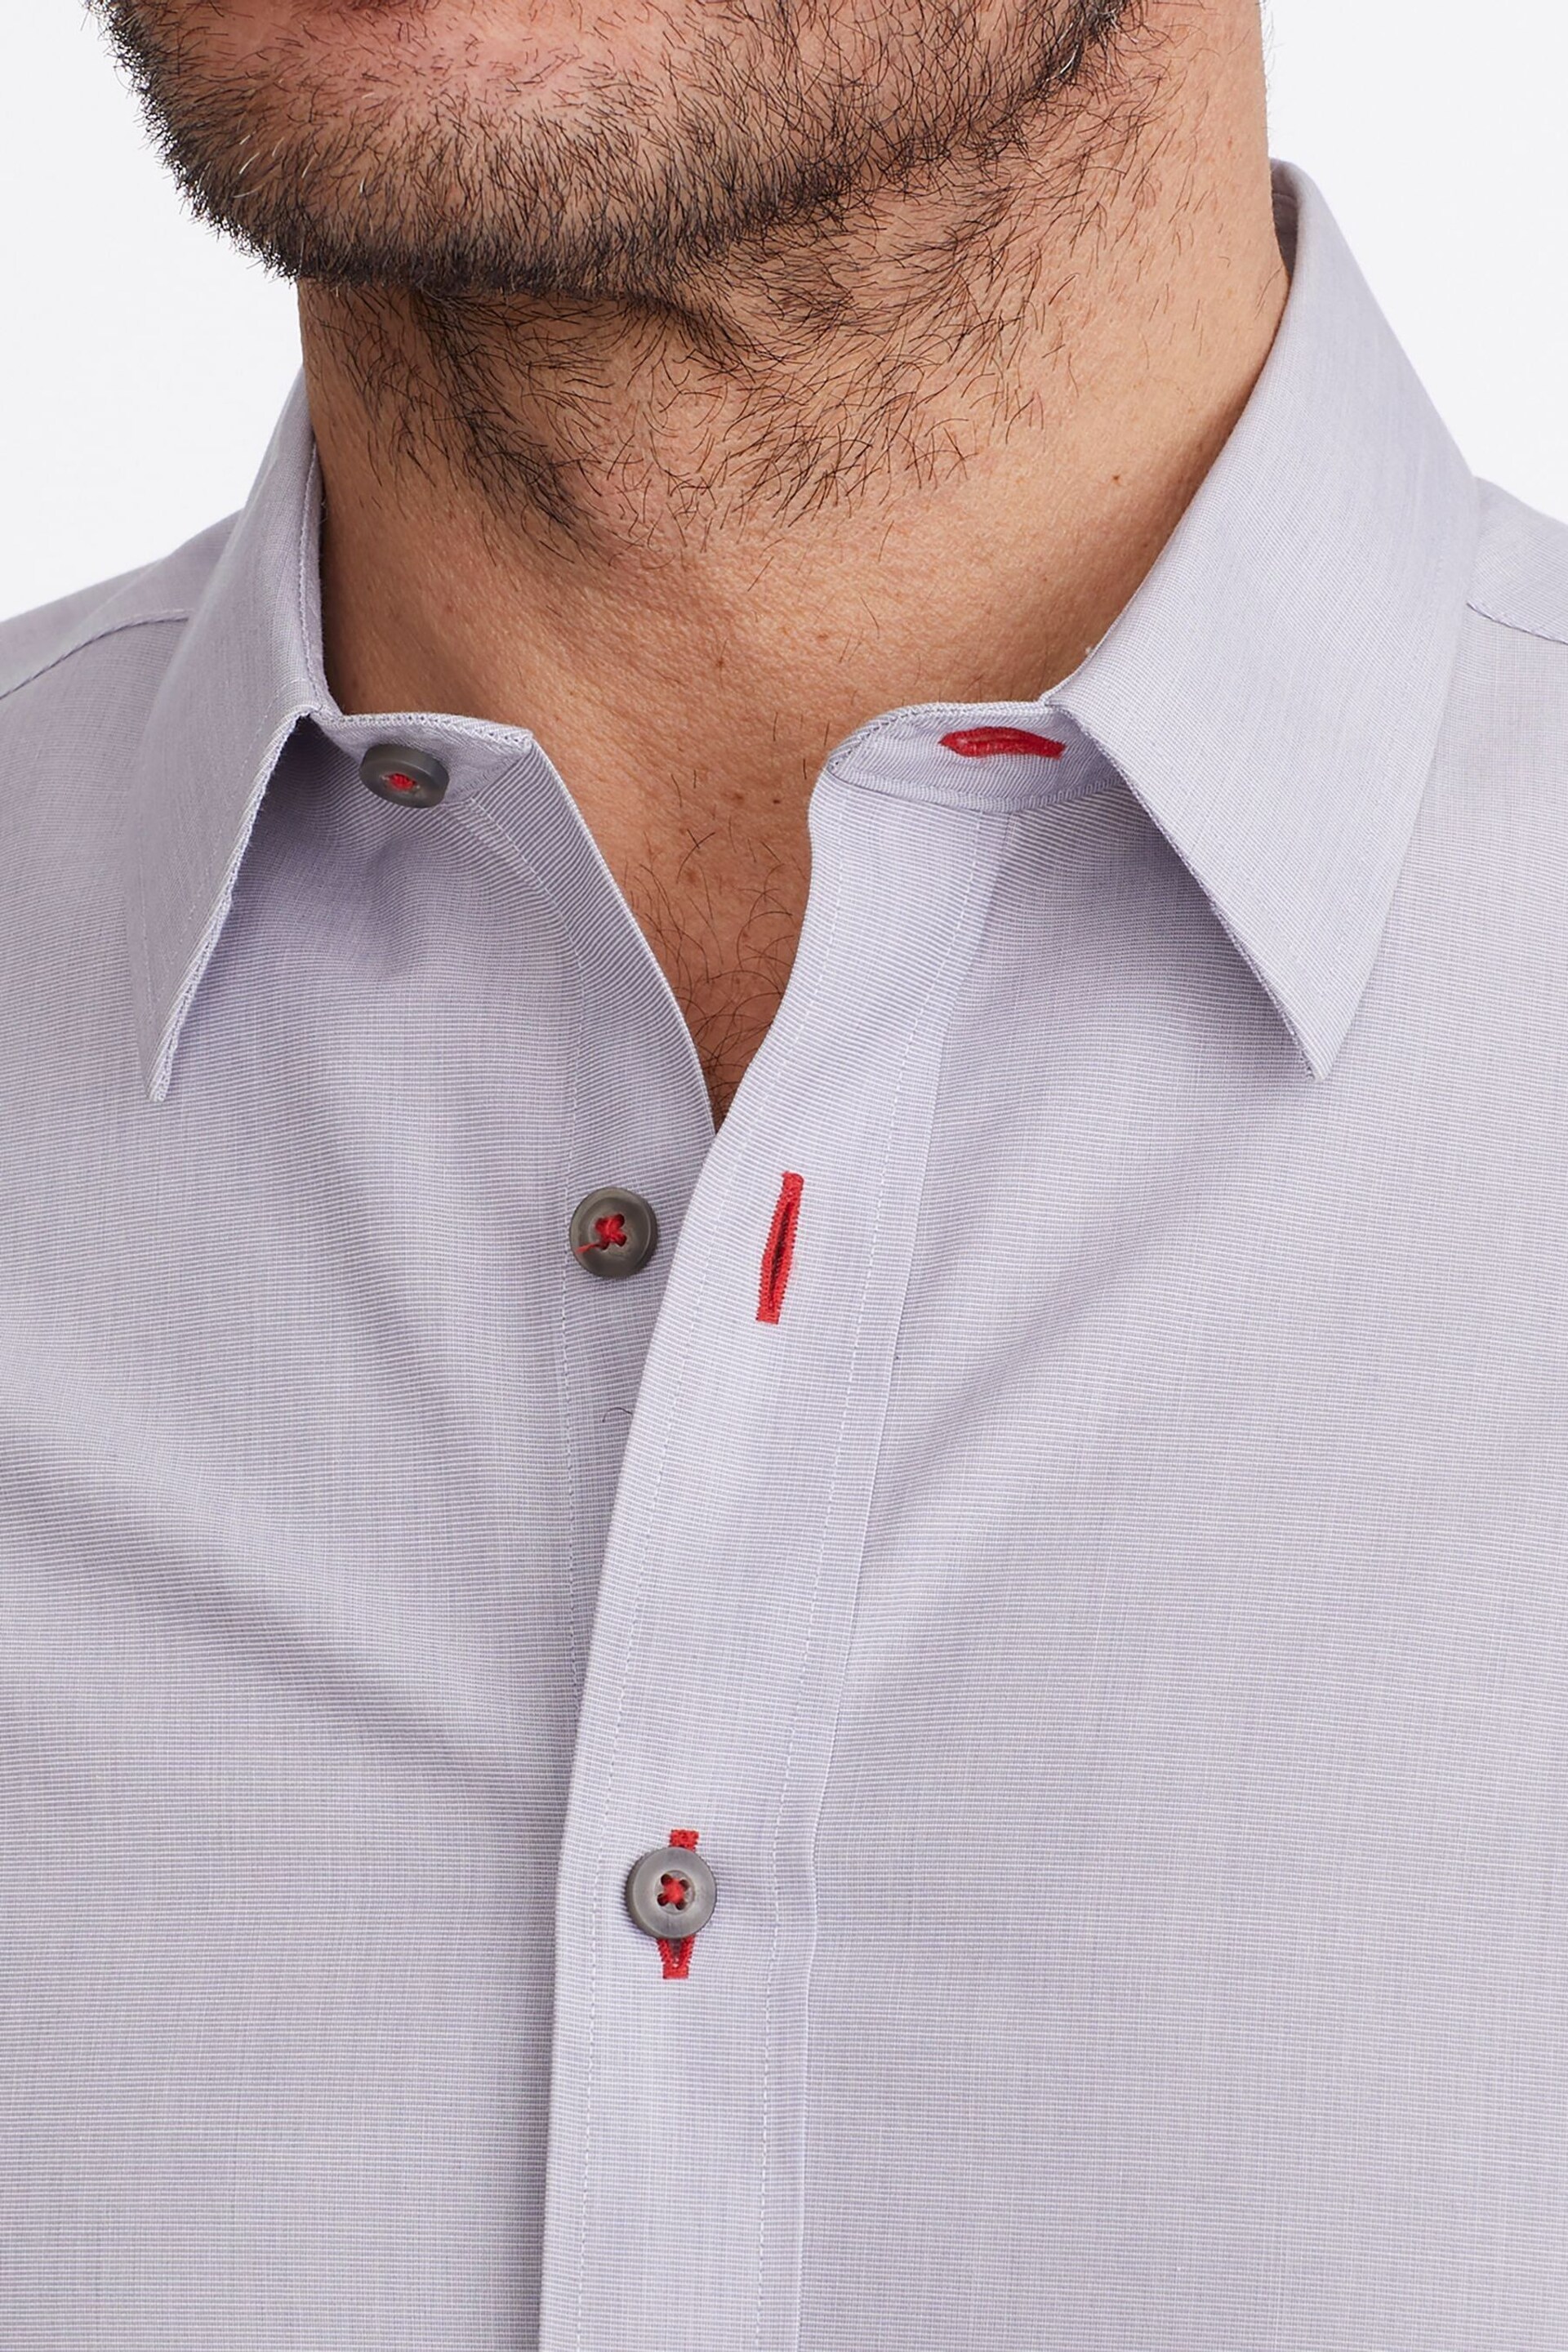 UNTUCKit Grey Light Wrinkle-Free Relaxed Fit Rubican Shirt - Image 4 of 6